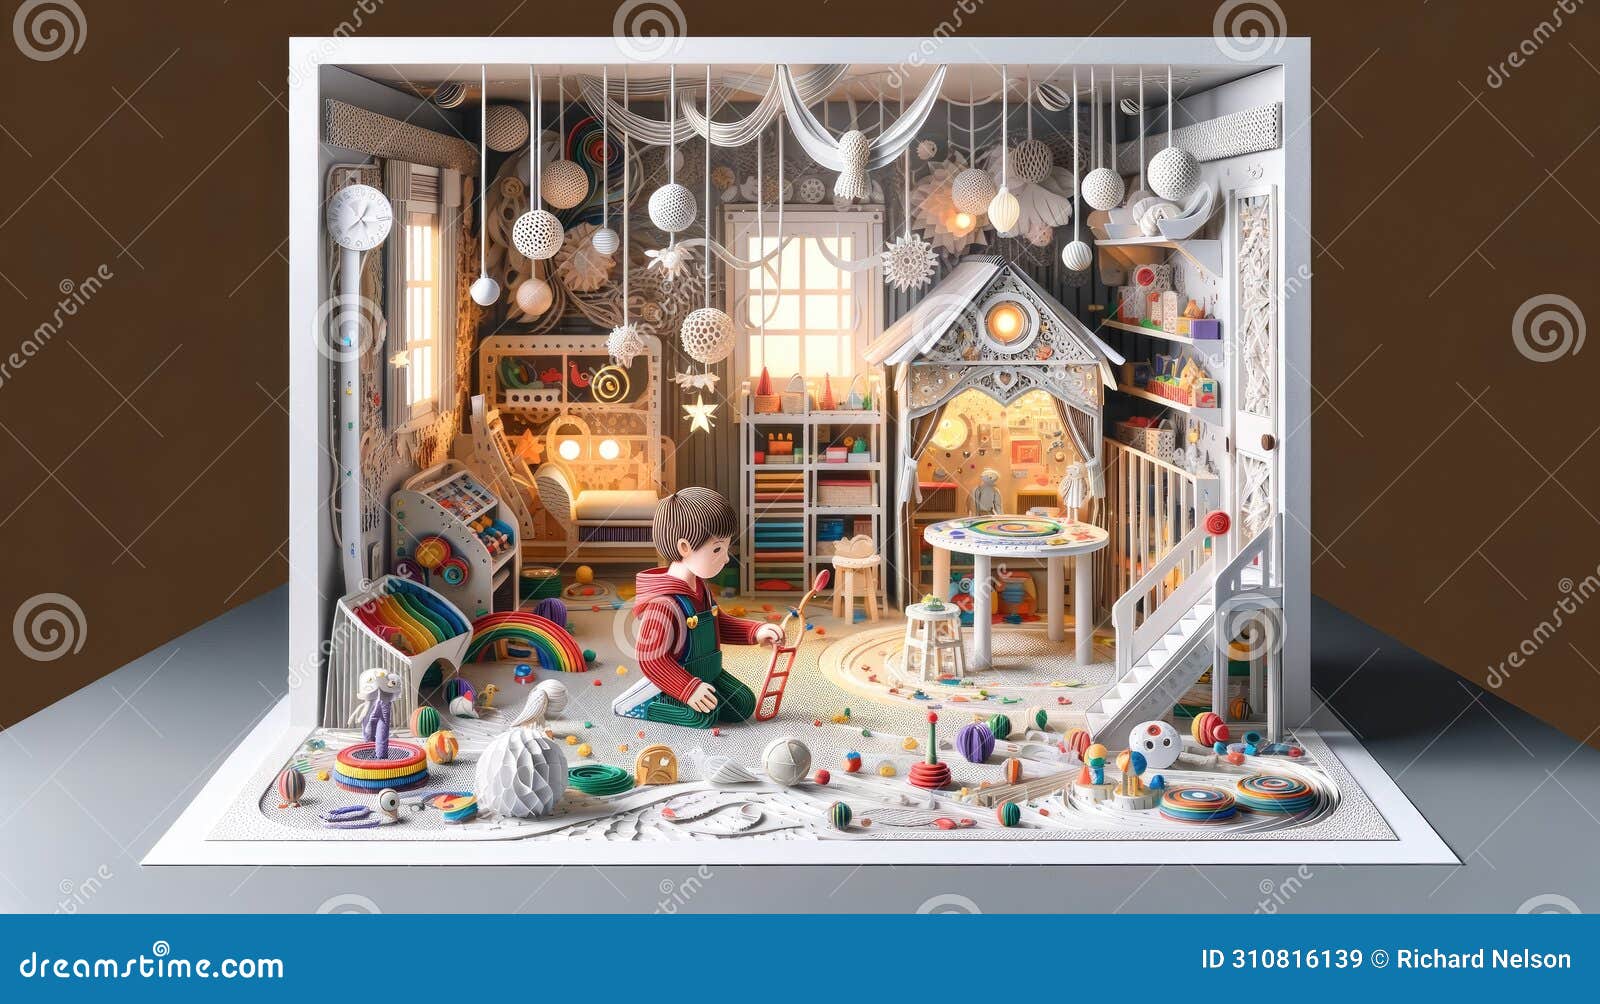 child playing in a detailed toy-filled room diorama